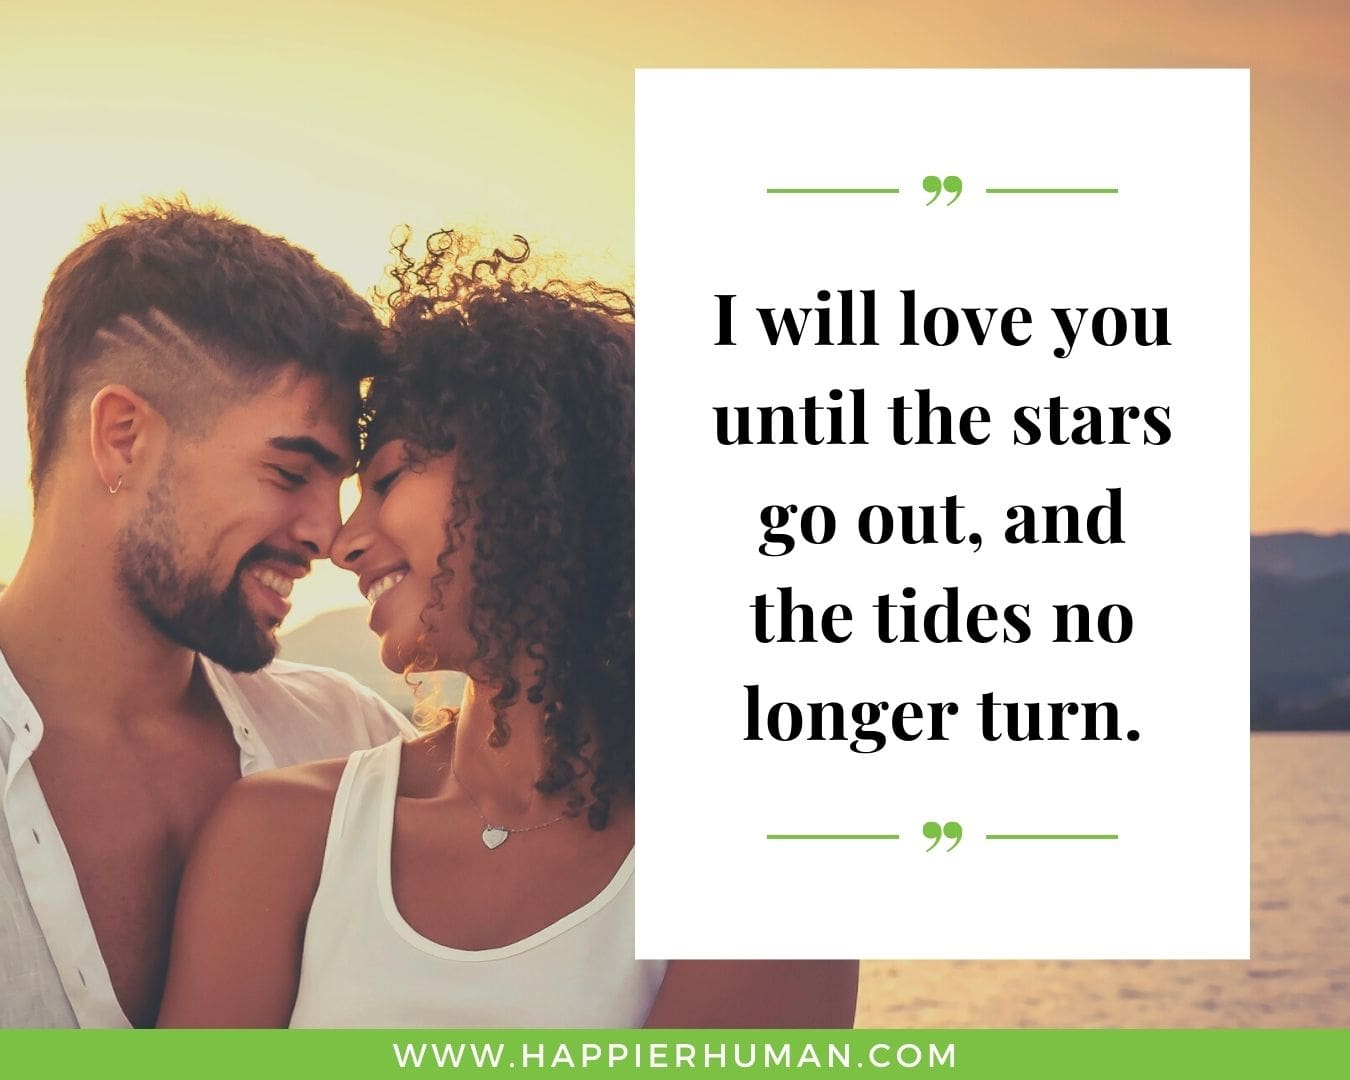 Unconditional Love Quotes for Her - “I will love you until the stars go out, and the tides no longer turn.”